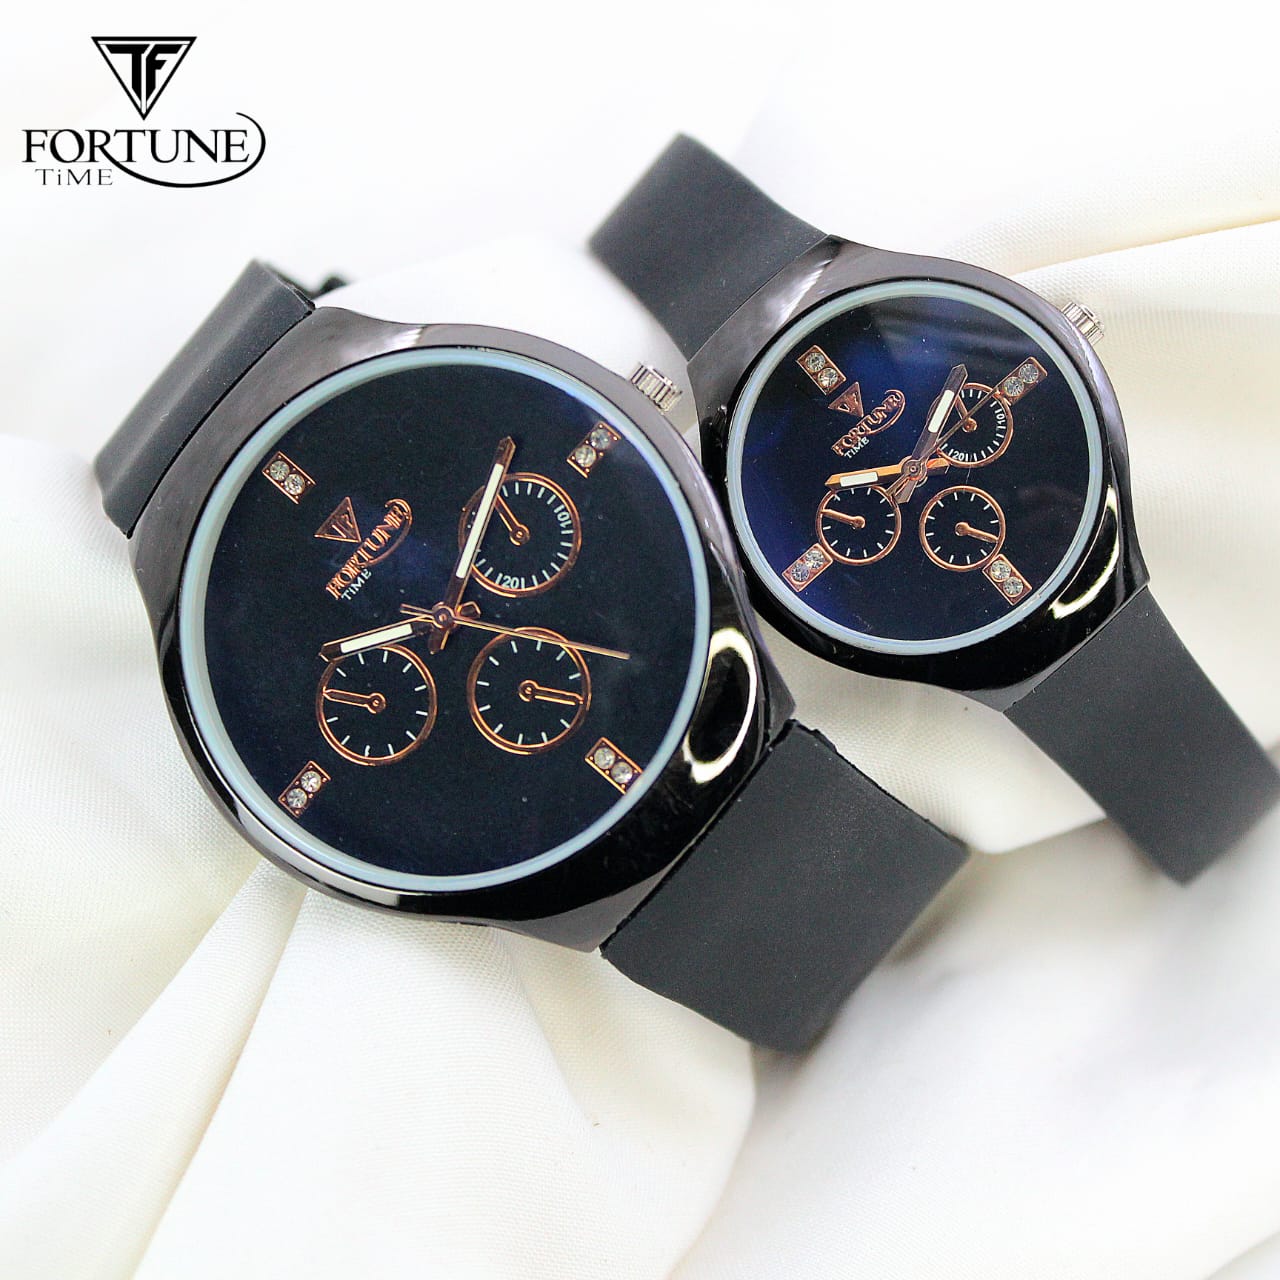 Fortune Time Watches pair  for men and women's